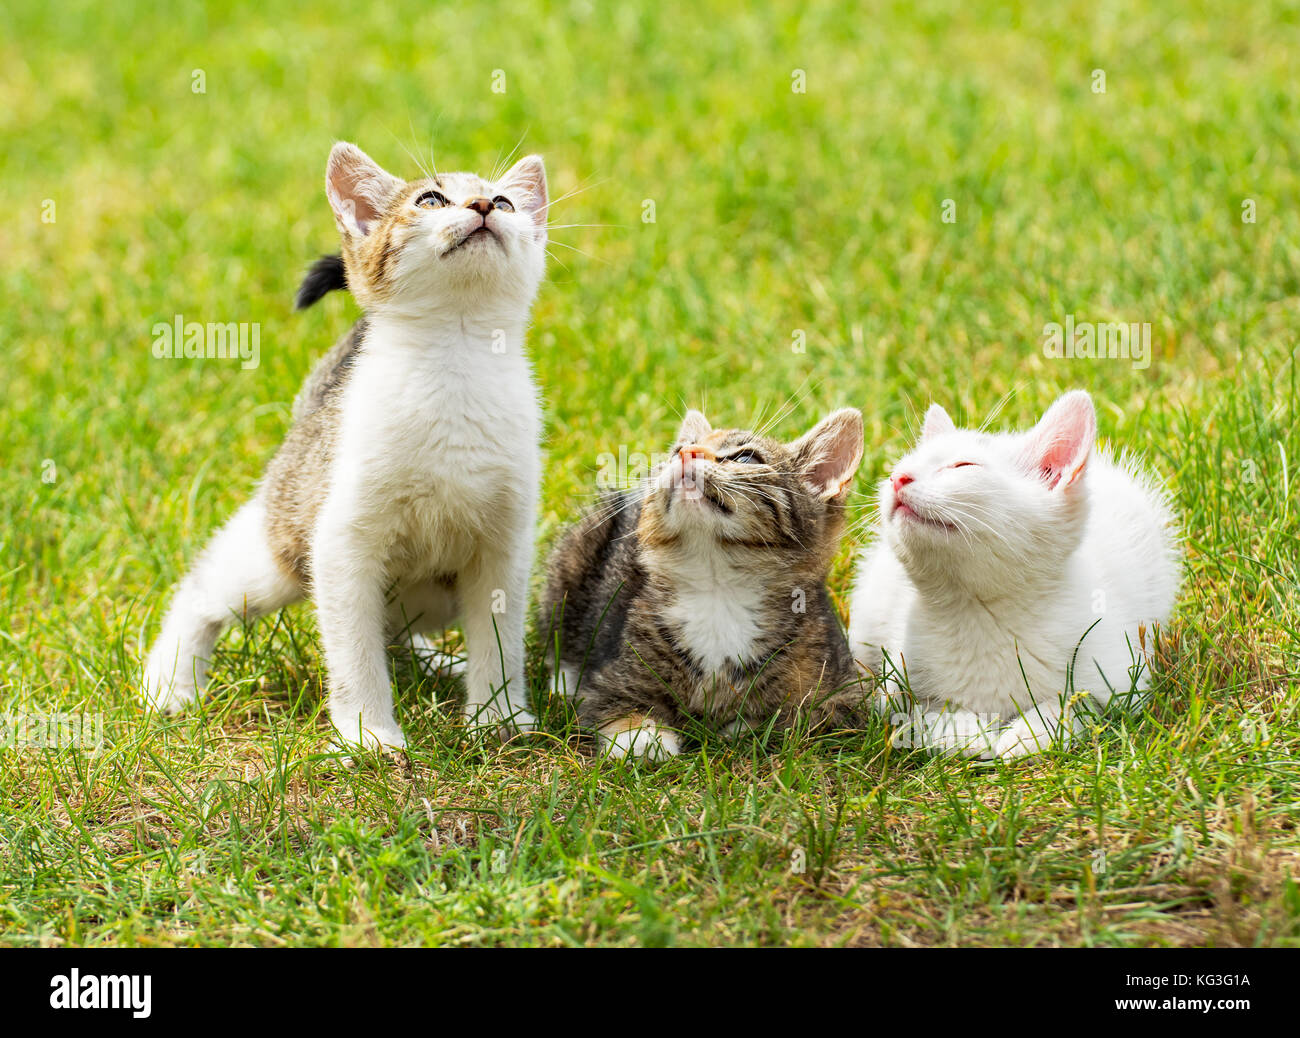 Three cute kittens on the grass, all looking up Stock Photo